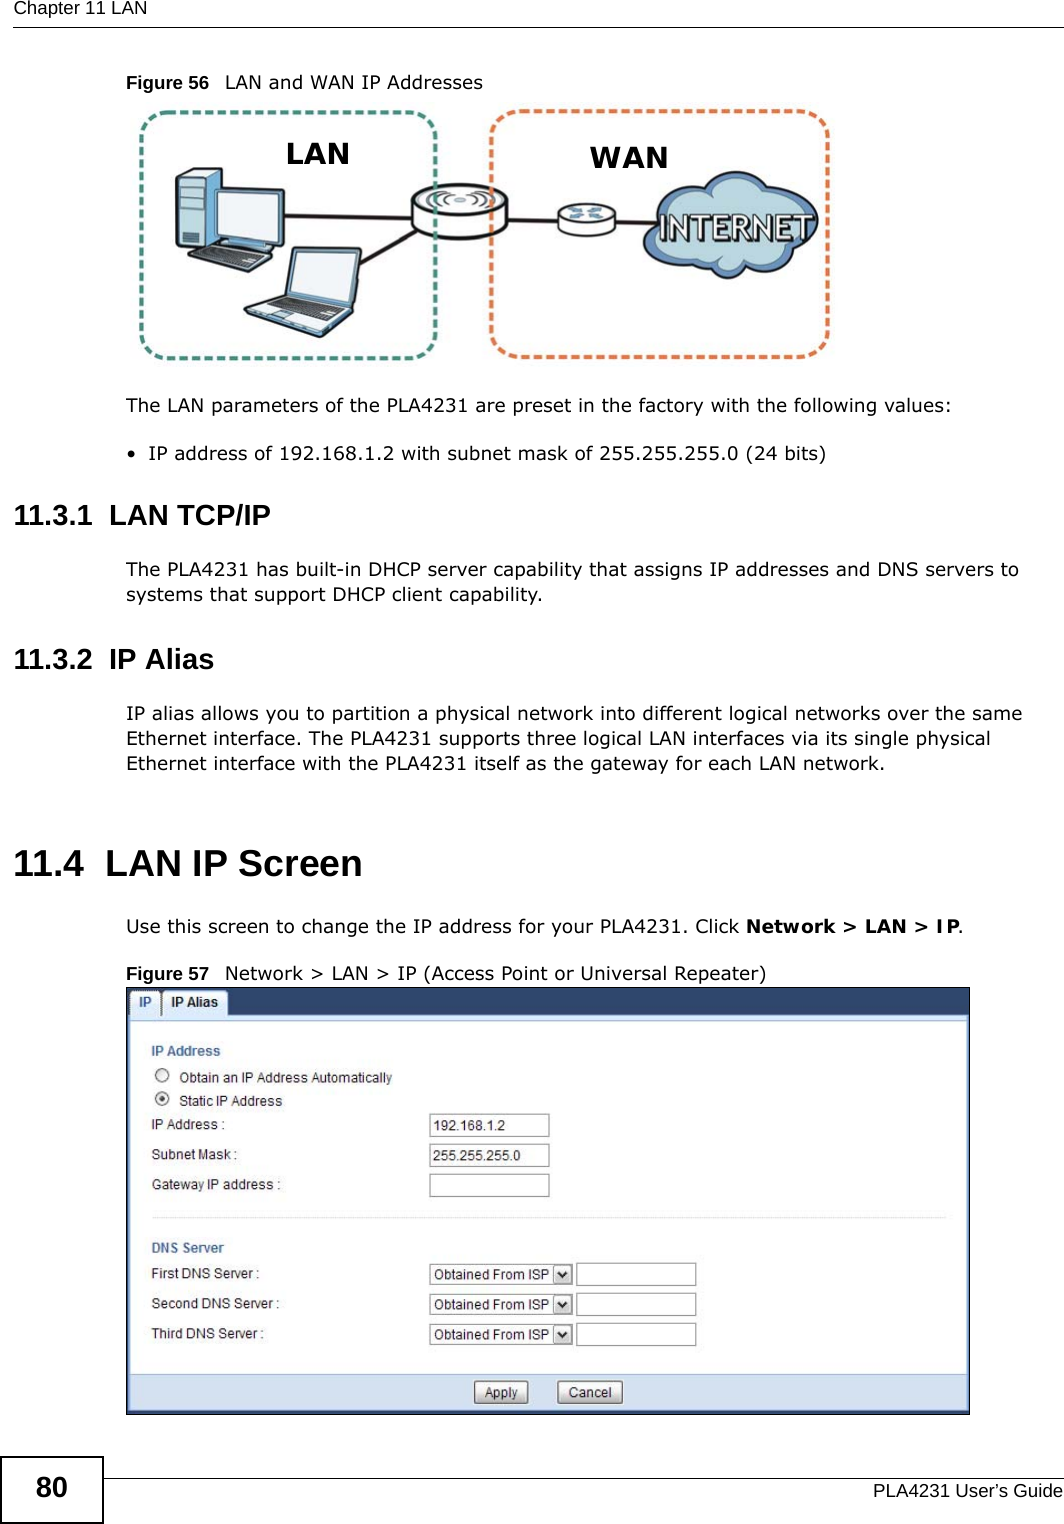 Chapter 11 LANPLA4231 User’s Guide80Figure 56   LAN and WAN IP AddressesThe LAN parameters of the PLA4231 are preset in the factory with the following values:• IP address of 192.168.1.2 with subnet mask of 255.255.255.0 (24 bits)11.3.1  LAN TCP/IP The PLA4231 has built-in DHCP server capability that assigns IP addresses and DNS servers to systems that support DHCP client capability.11.3.2  IP AliasIP alias allows you to partition a physical network into different logical networks over the same Ethernet interface. The PLA4231 supports three logical LAN interfaces via its single physical Ethernet interface with the PLA4231 itself as the gateway for each LAN network.11.4  LAN IP ScreenUse this screen to change the IP address for your PLA4231. Click Network &gt; LAN &gt; IP.Figure 57   Network &gt; LAN &gt; IP (Access Point or Universal Repeater) LAN WAN